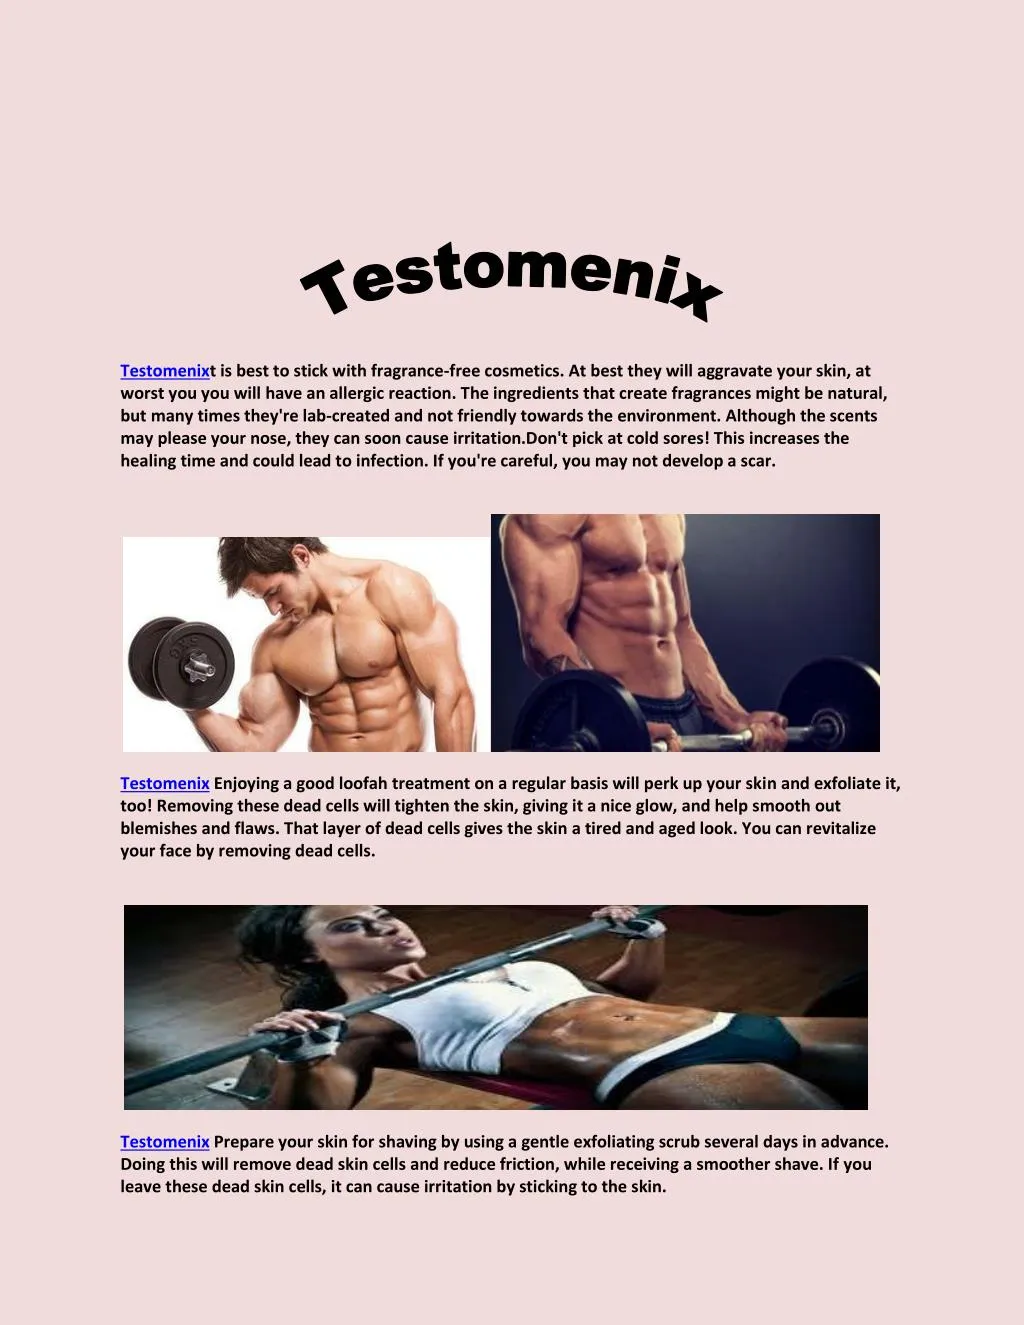 testomenixt is best to stick with fragrance free